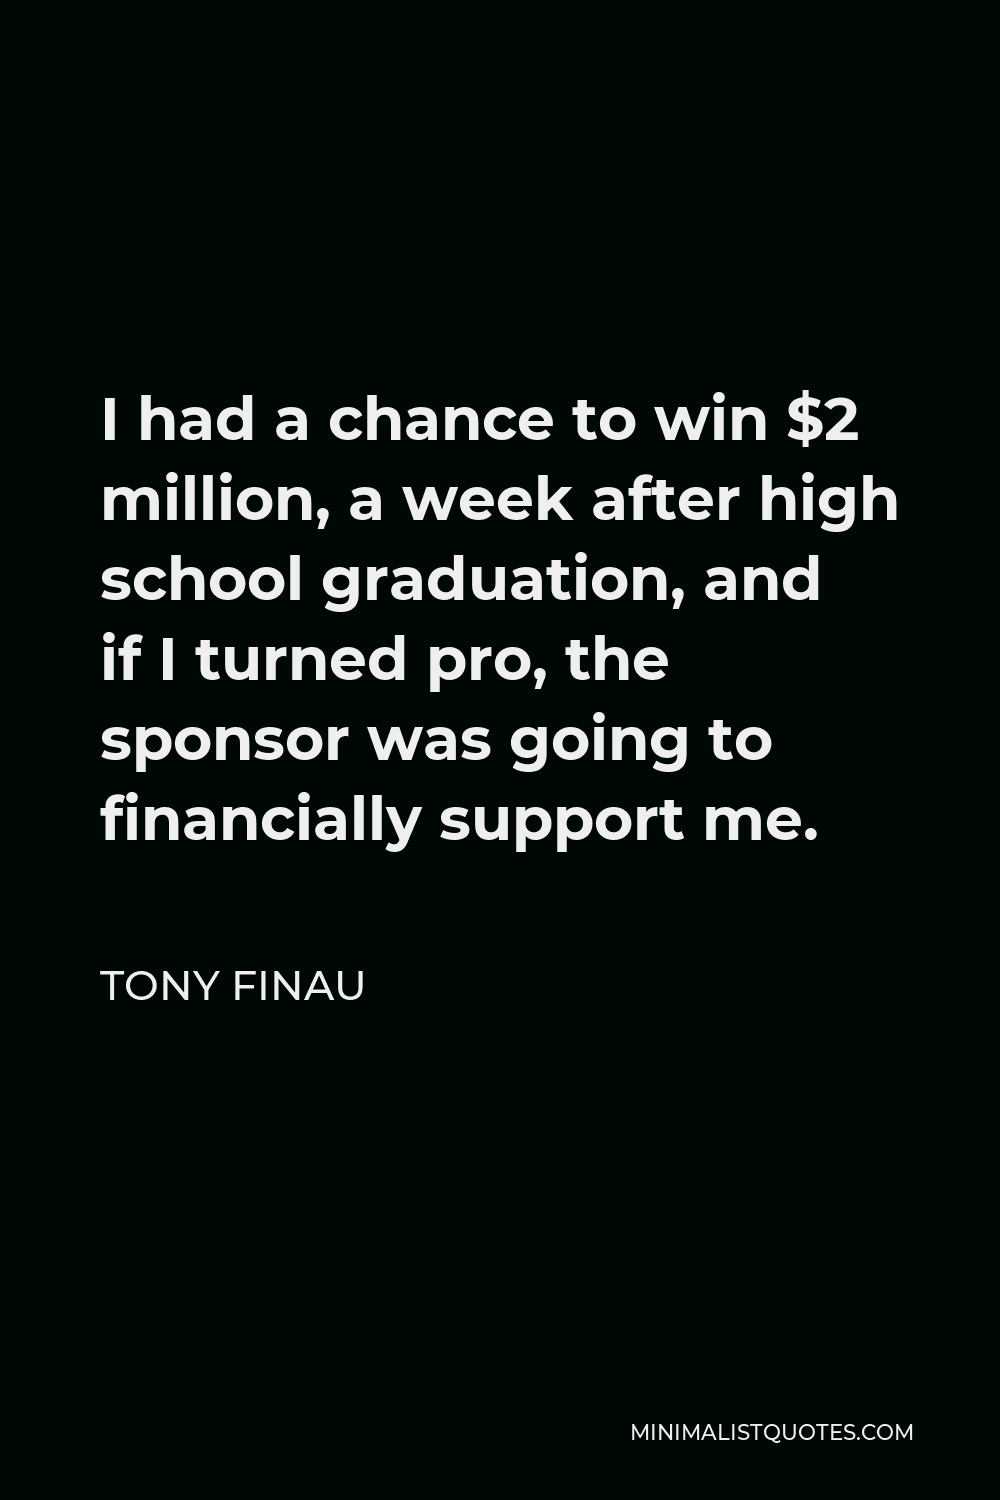 Tony Finau Quote - I had a chance to win $2 million, a week after high school graduation, and if I turned pro, the sponsor was going to financially support me.